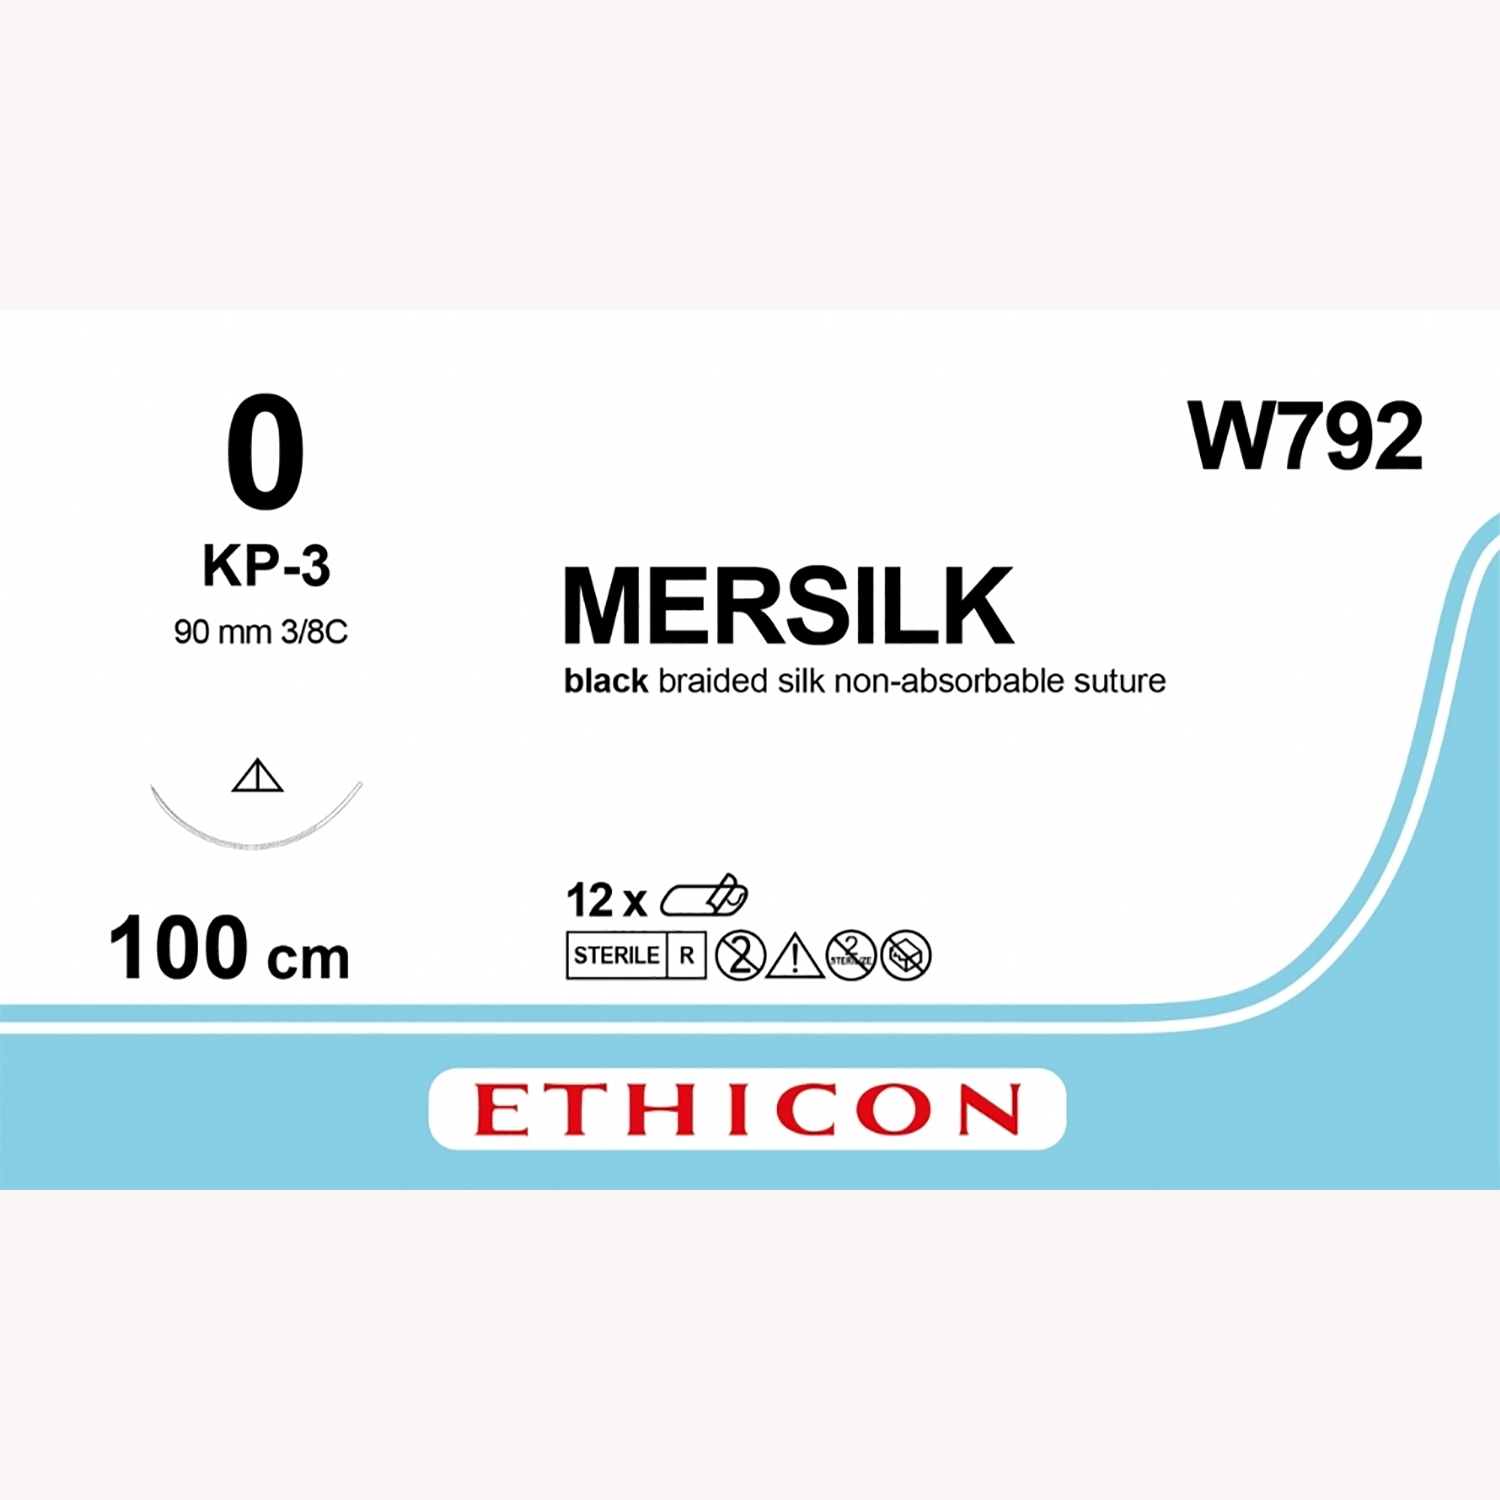 Ethicon Mersilk Suture | Non Absorbable | Black | Size: 0 | Length: 100cm | Needle: KP-3 | Pack of 12